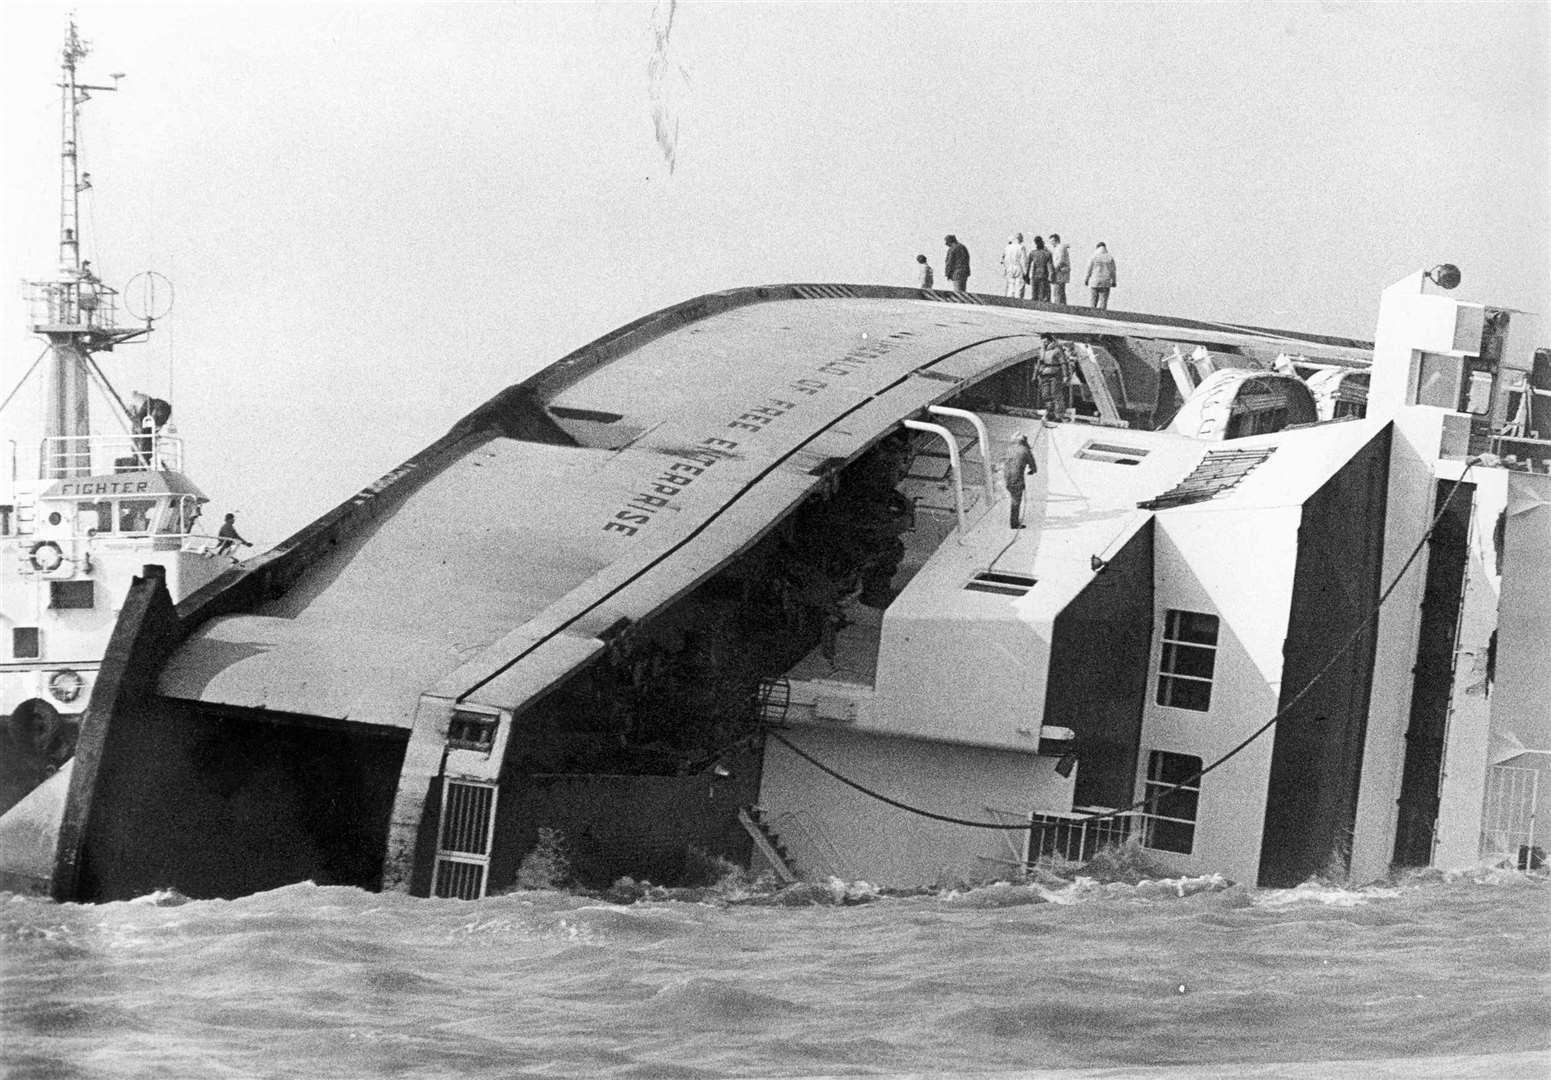 The capsized Herald of Free Enterprise in March 1987